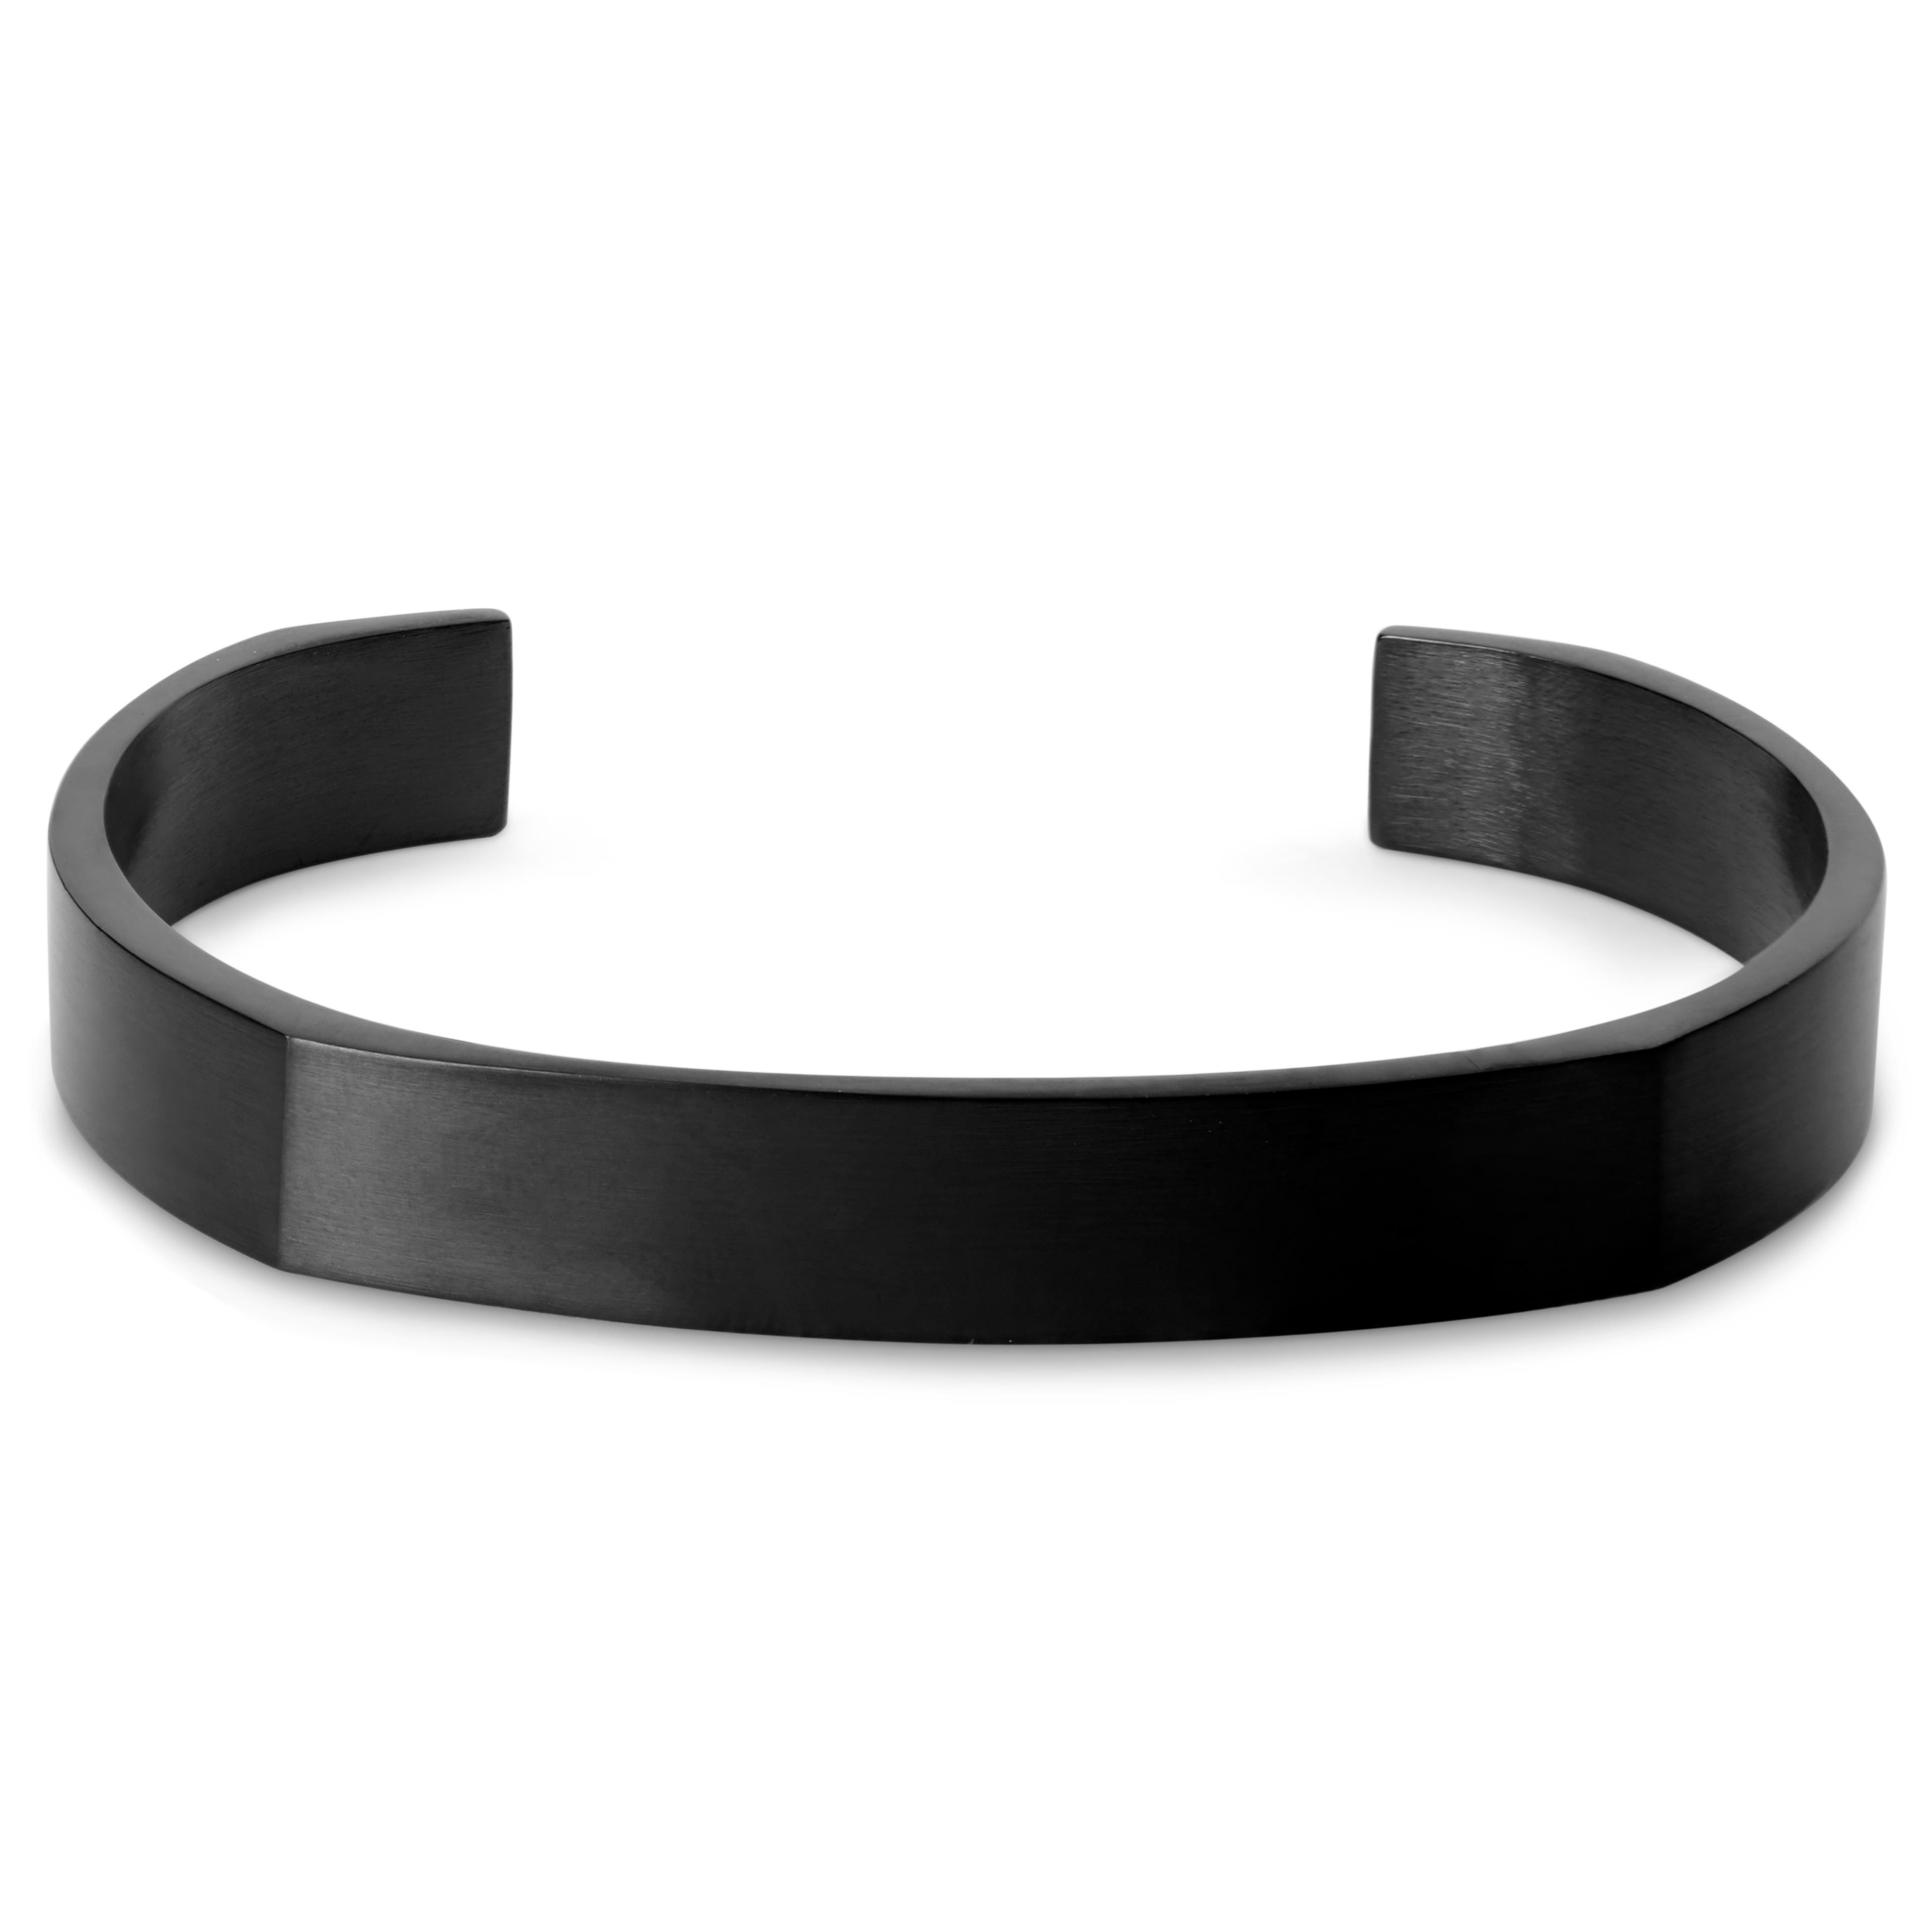 Brushed Black Stainless Steel Cuff Bracelet